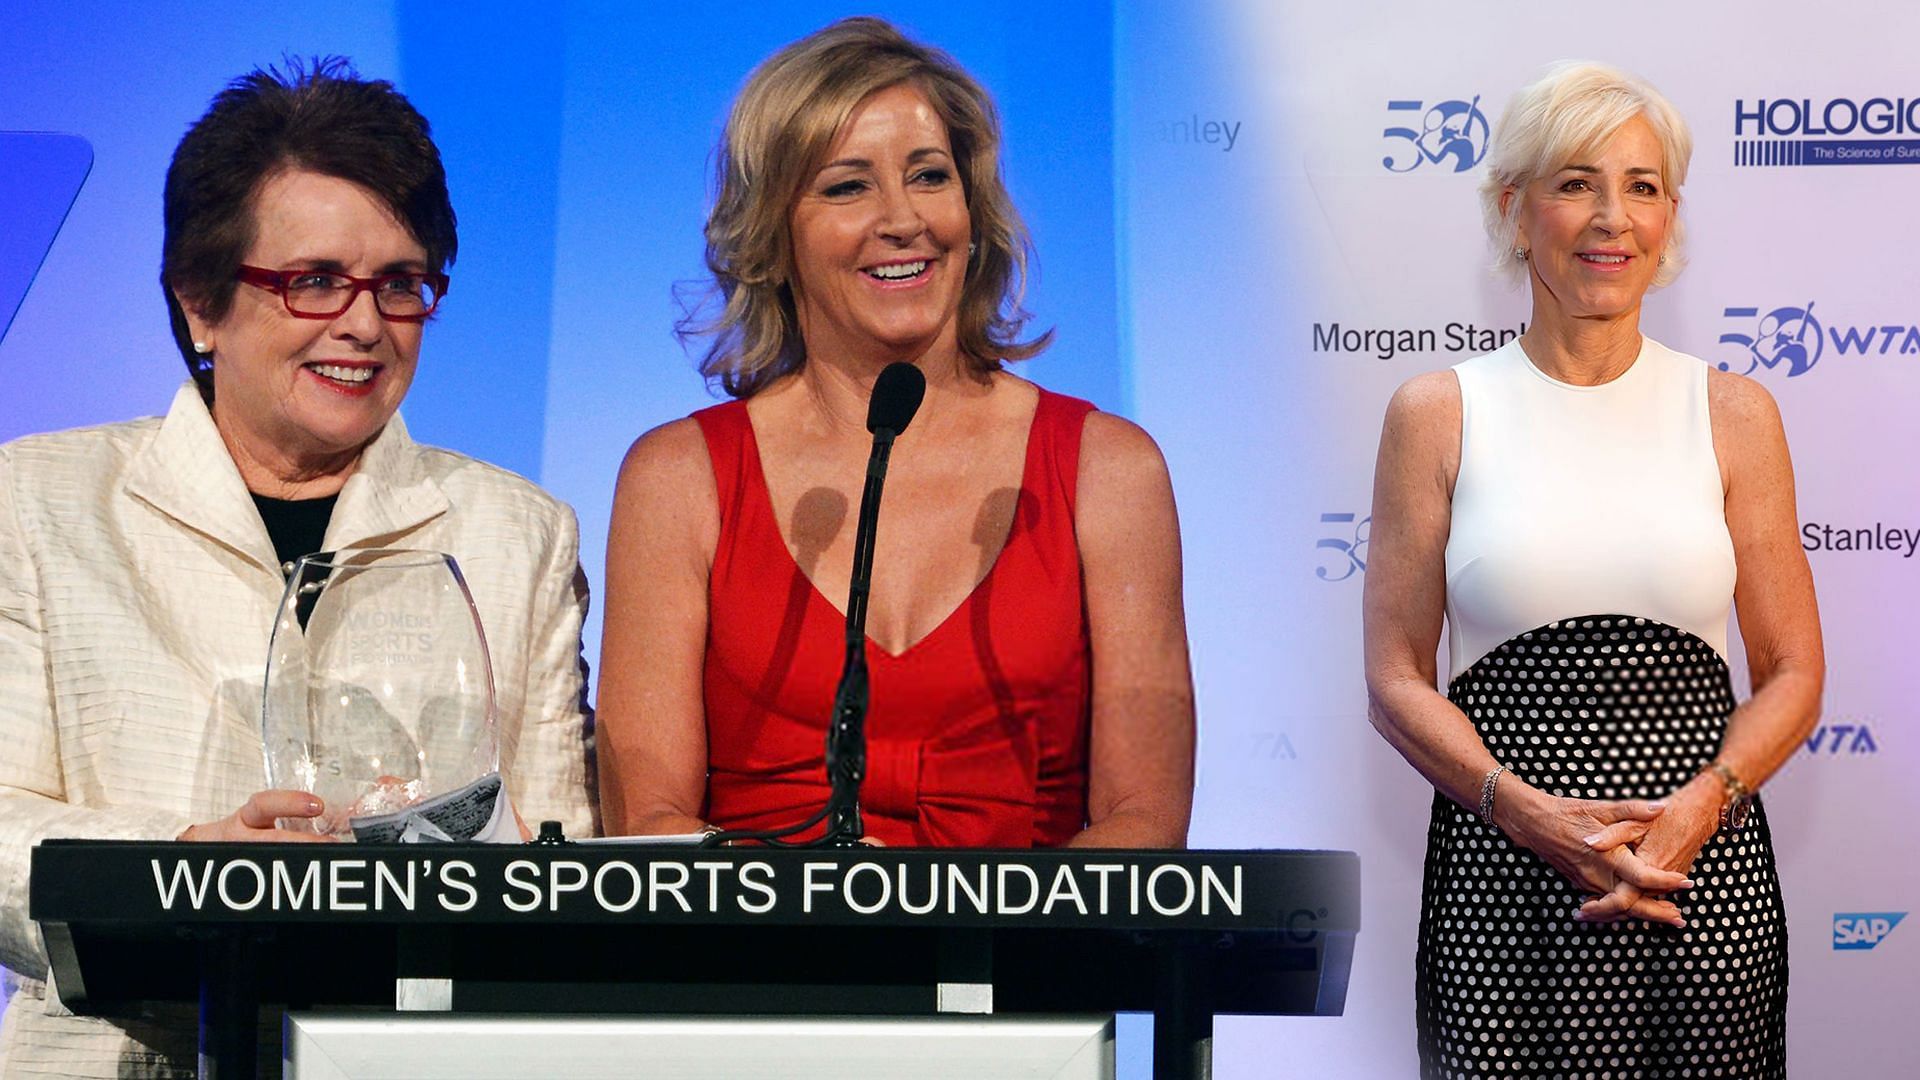 Chris Evert wished Billie Jean King a happy 80th birthday